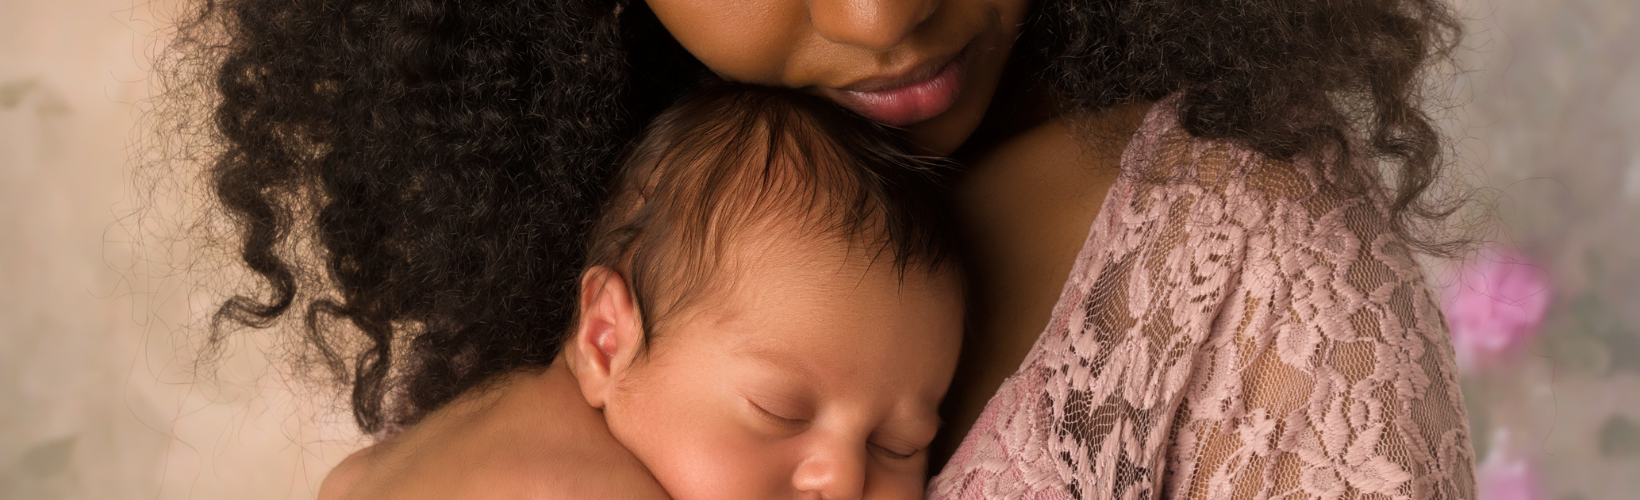 Tips: How To Deal With Postpartum Challenges